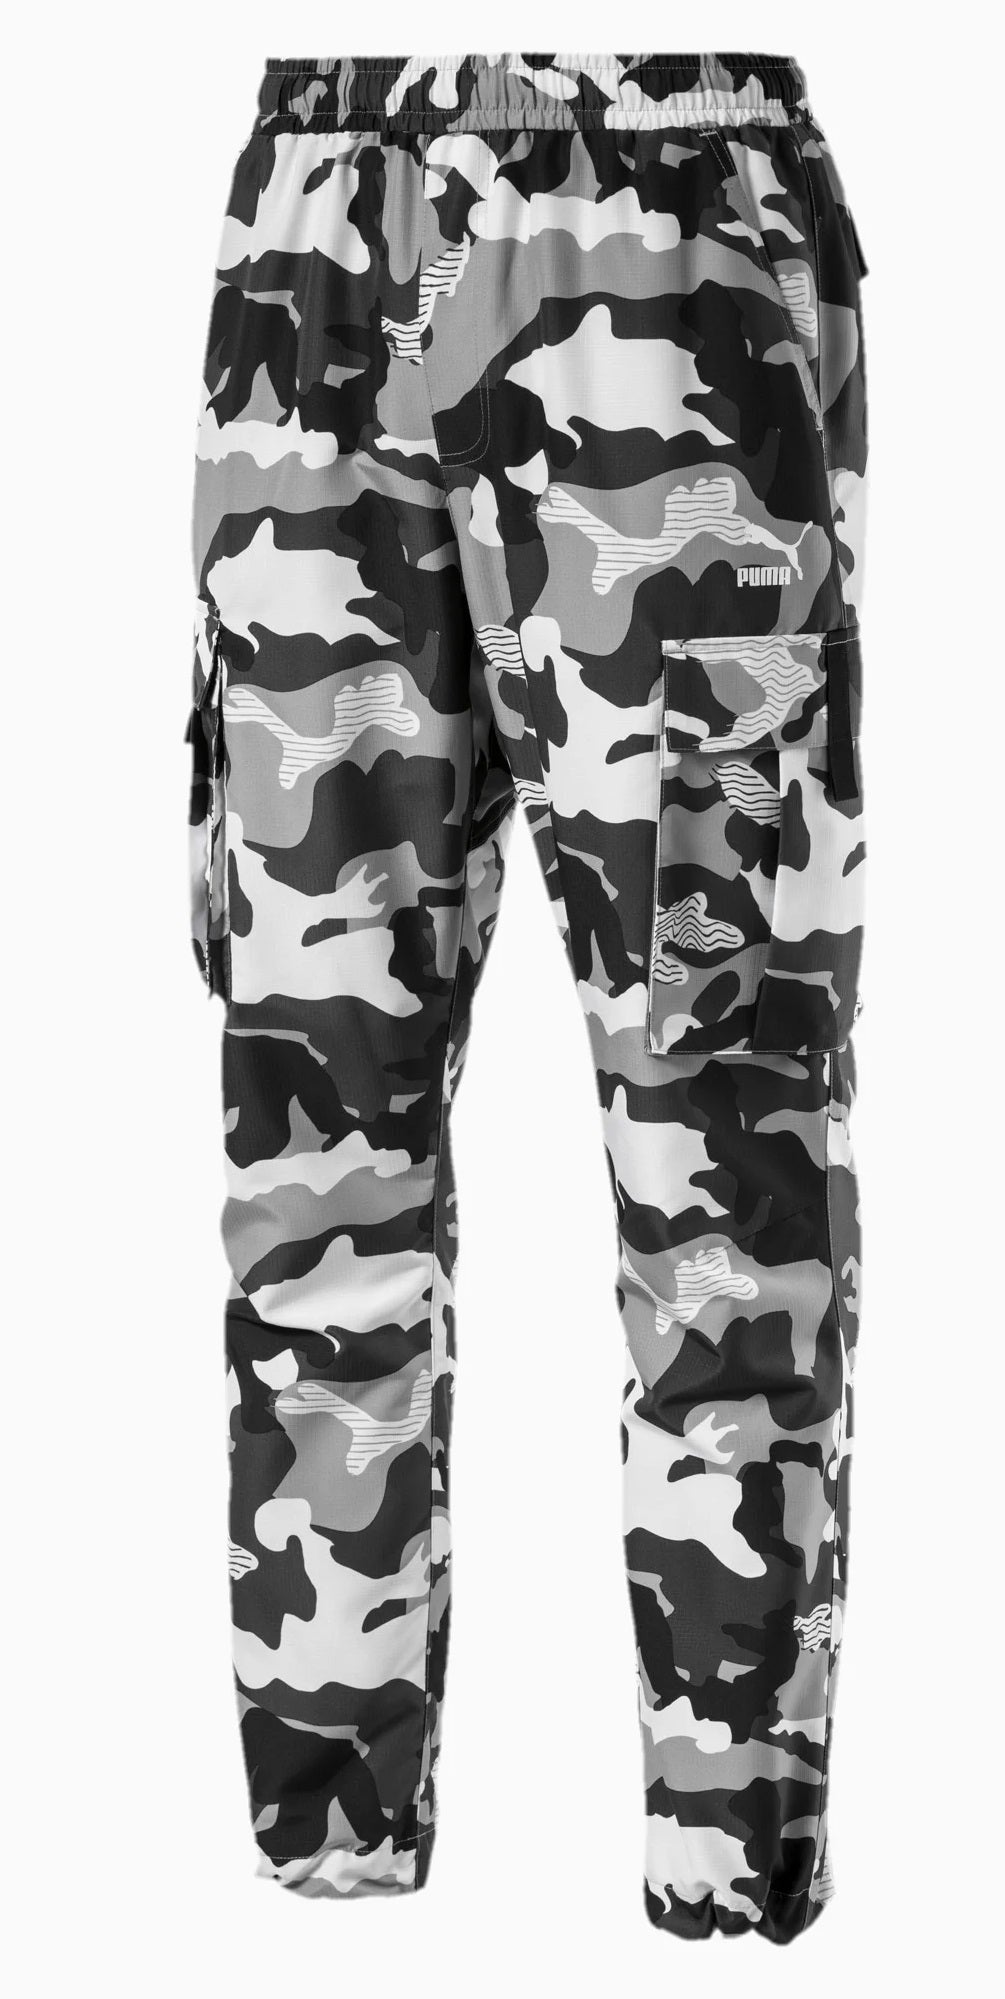 puma tapered joggers in grey camo